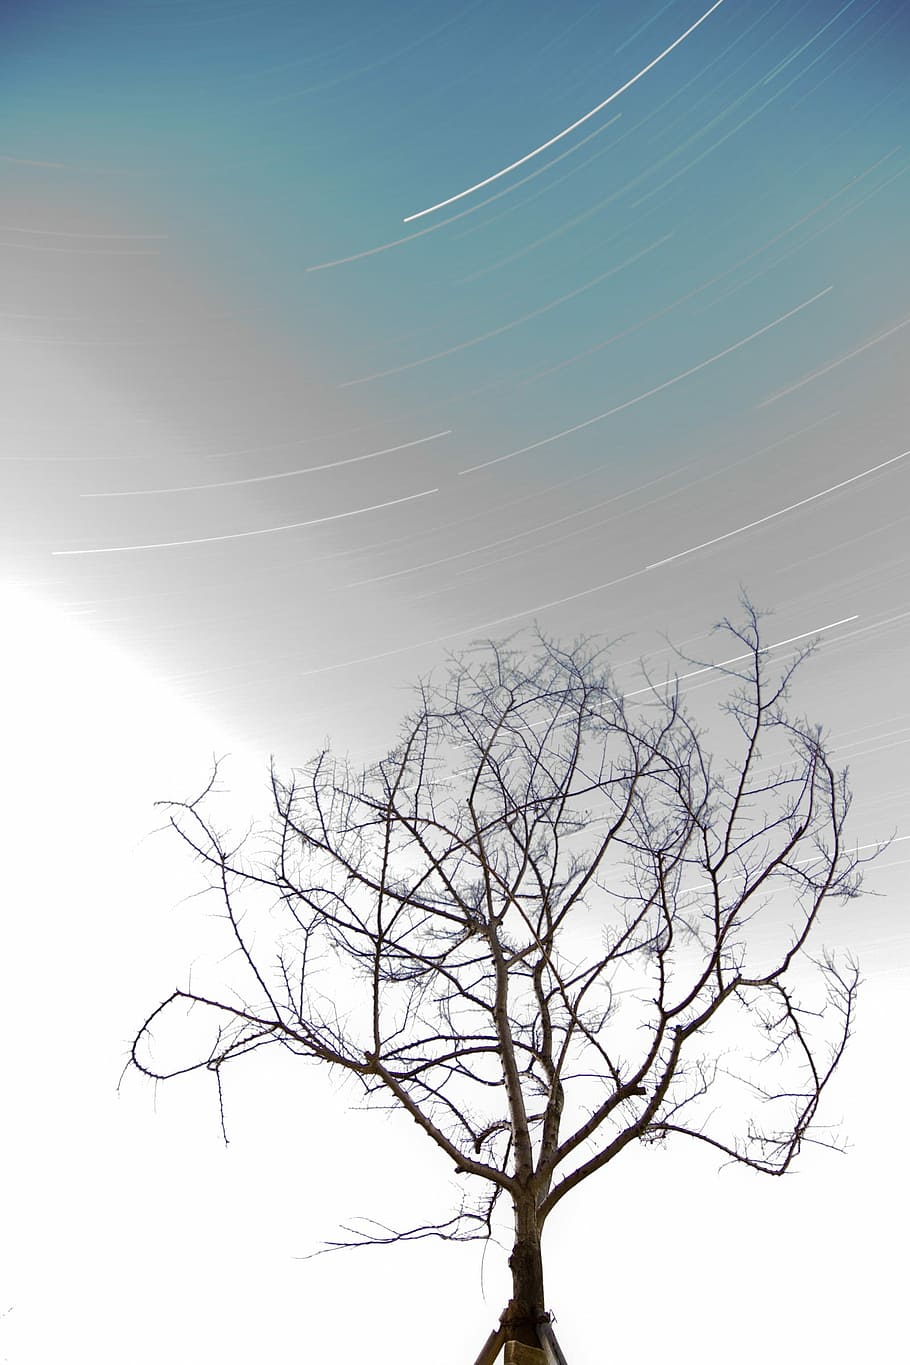 Trajectory, Failure, the trajectory of the, star, bare tree, branch, tree, nature, sky, plant